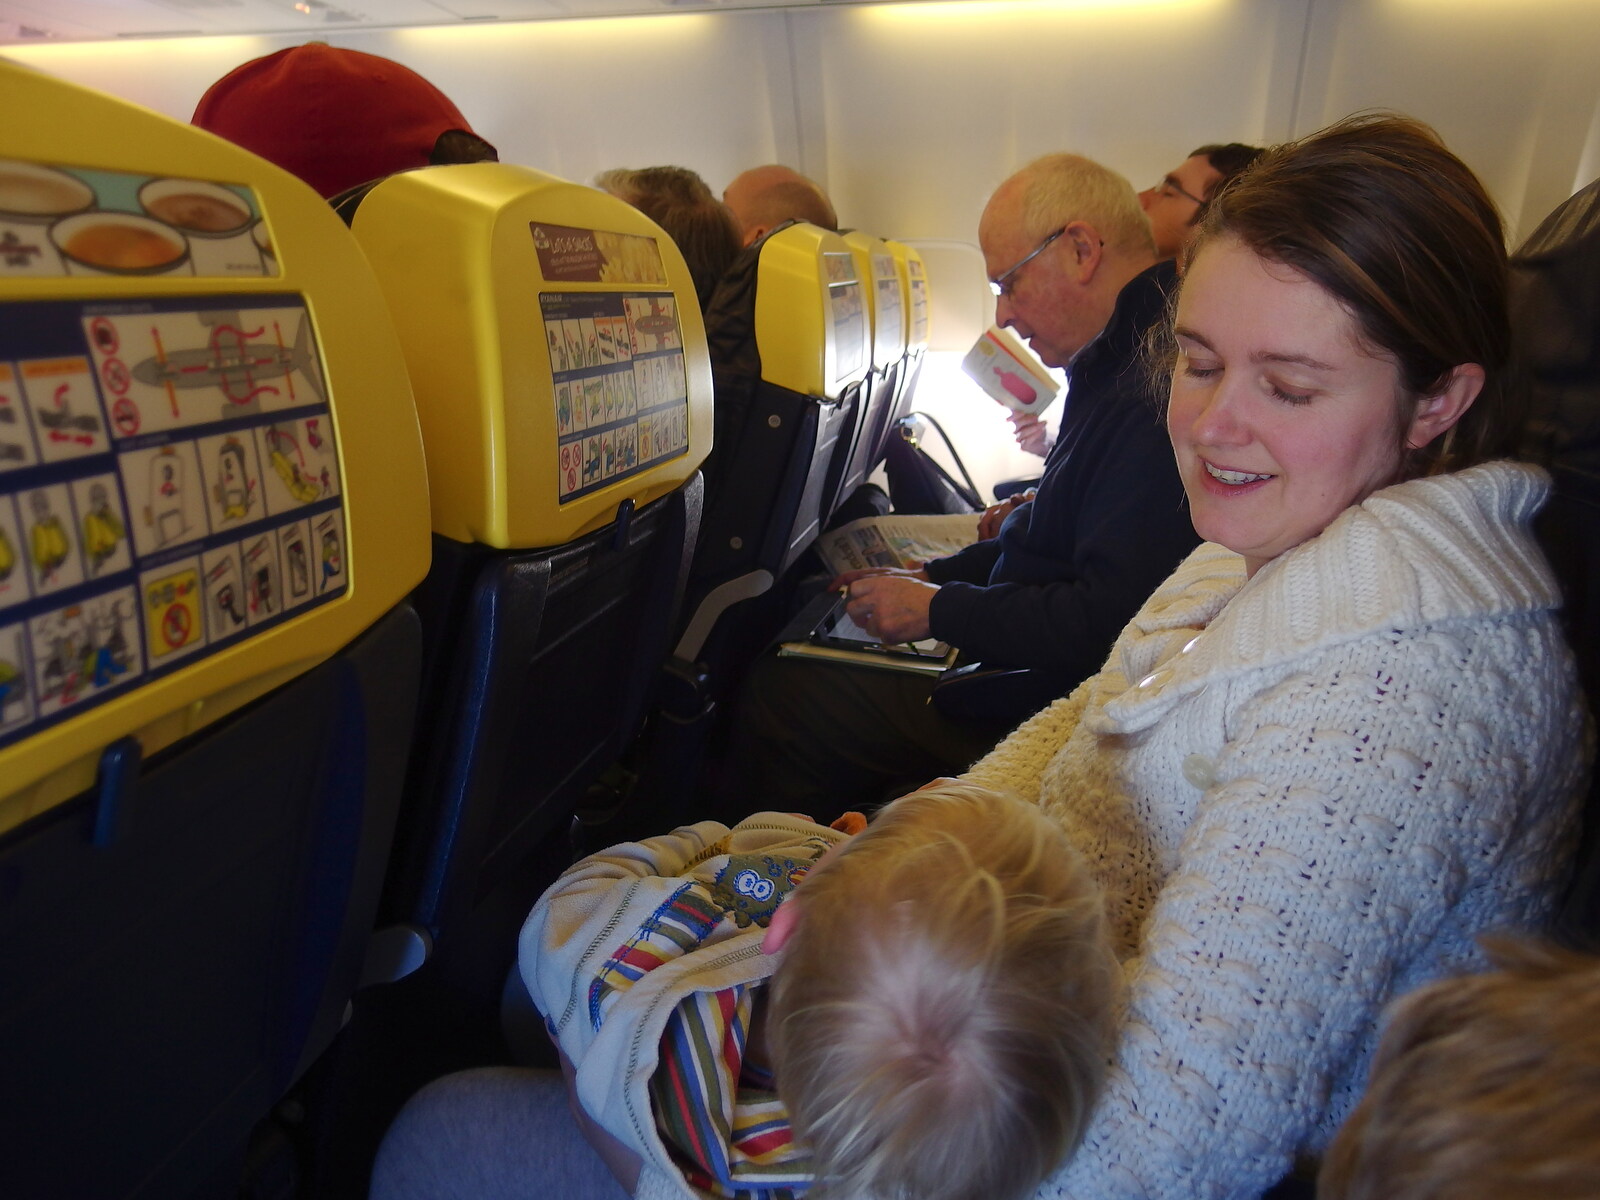 Harry and Isobel on the plane from Dun Laoghaire and an Electrical Disaster, Monkstown, County Dublin, Ireland - 4th January 2014